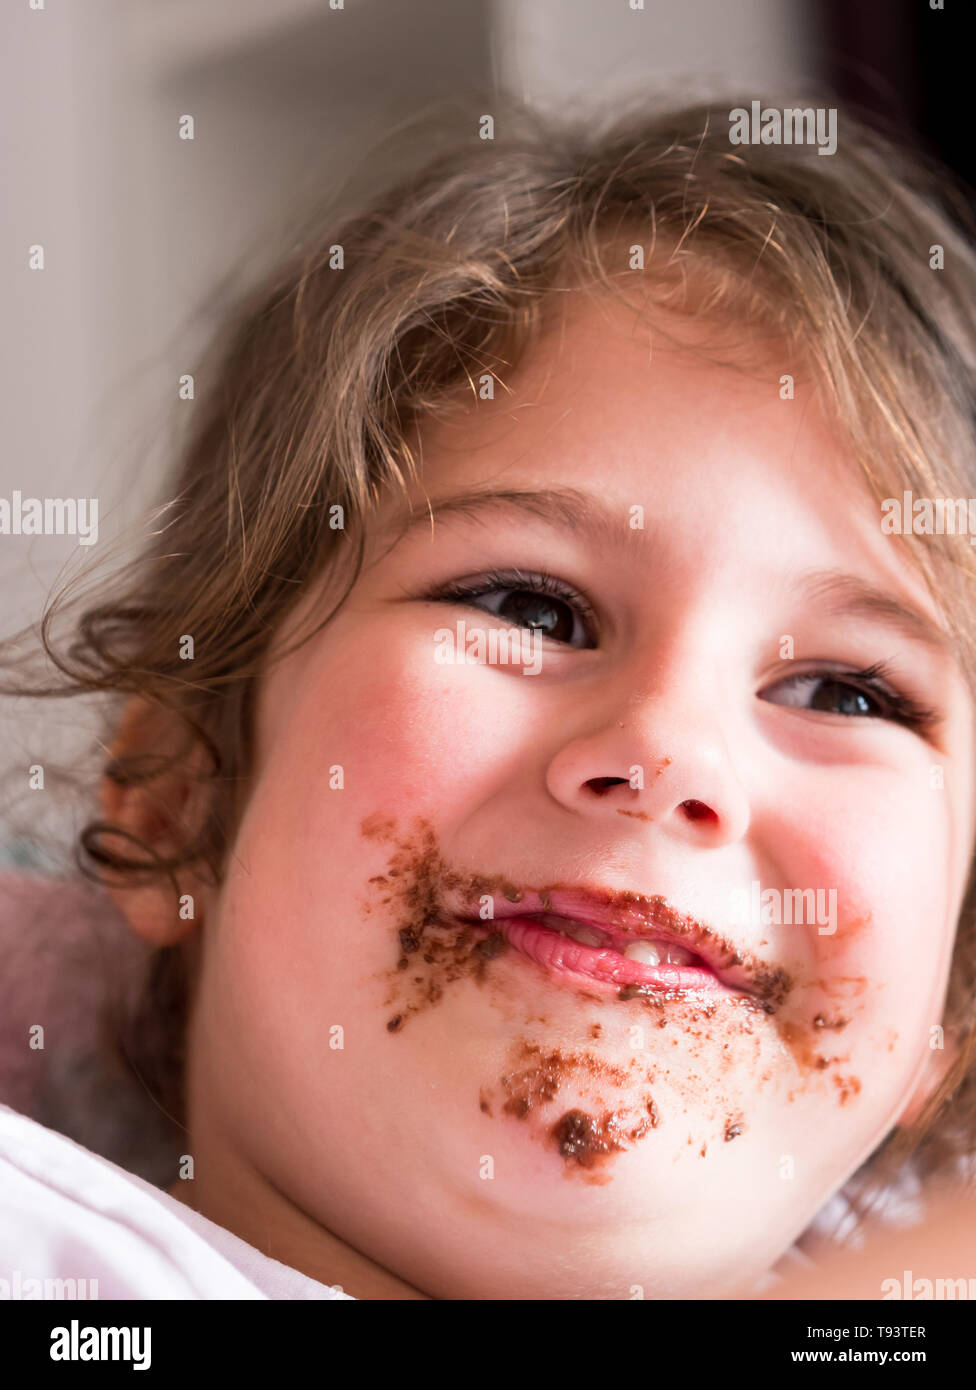 Cute messy with chocolate caucasian girl smiling Stock Photo